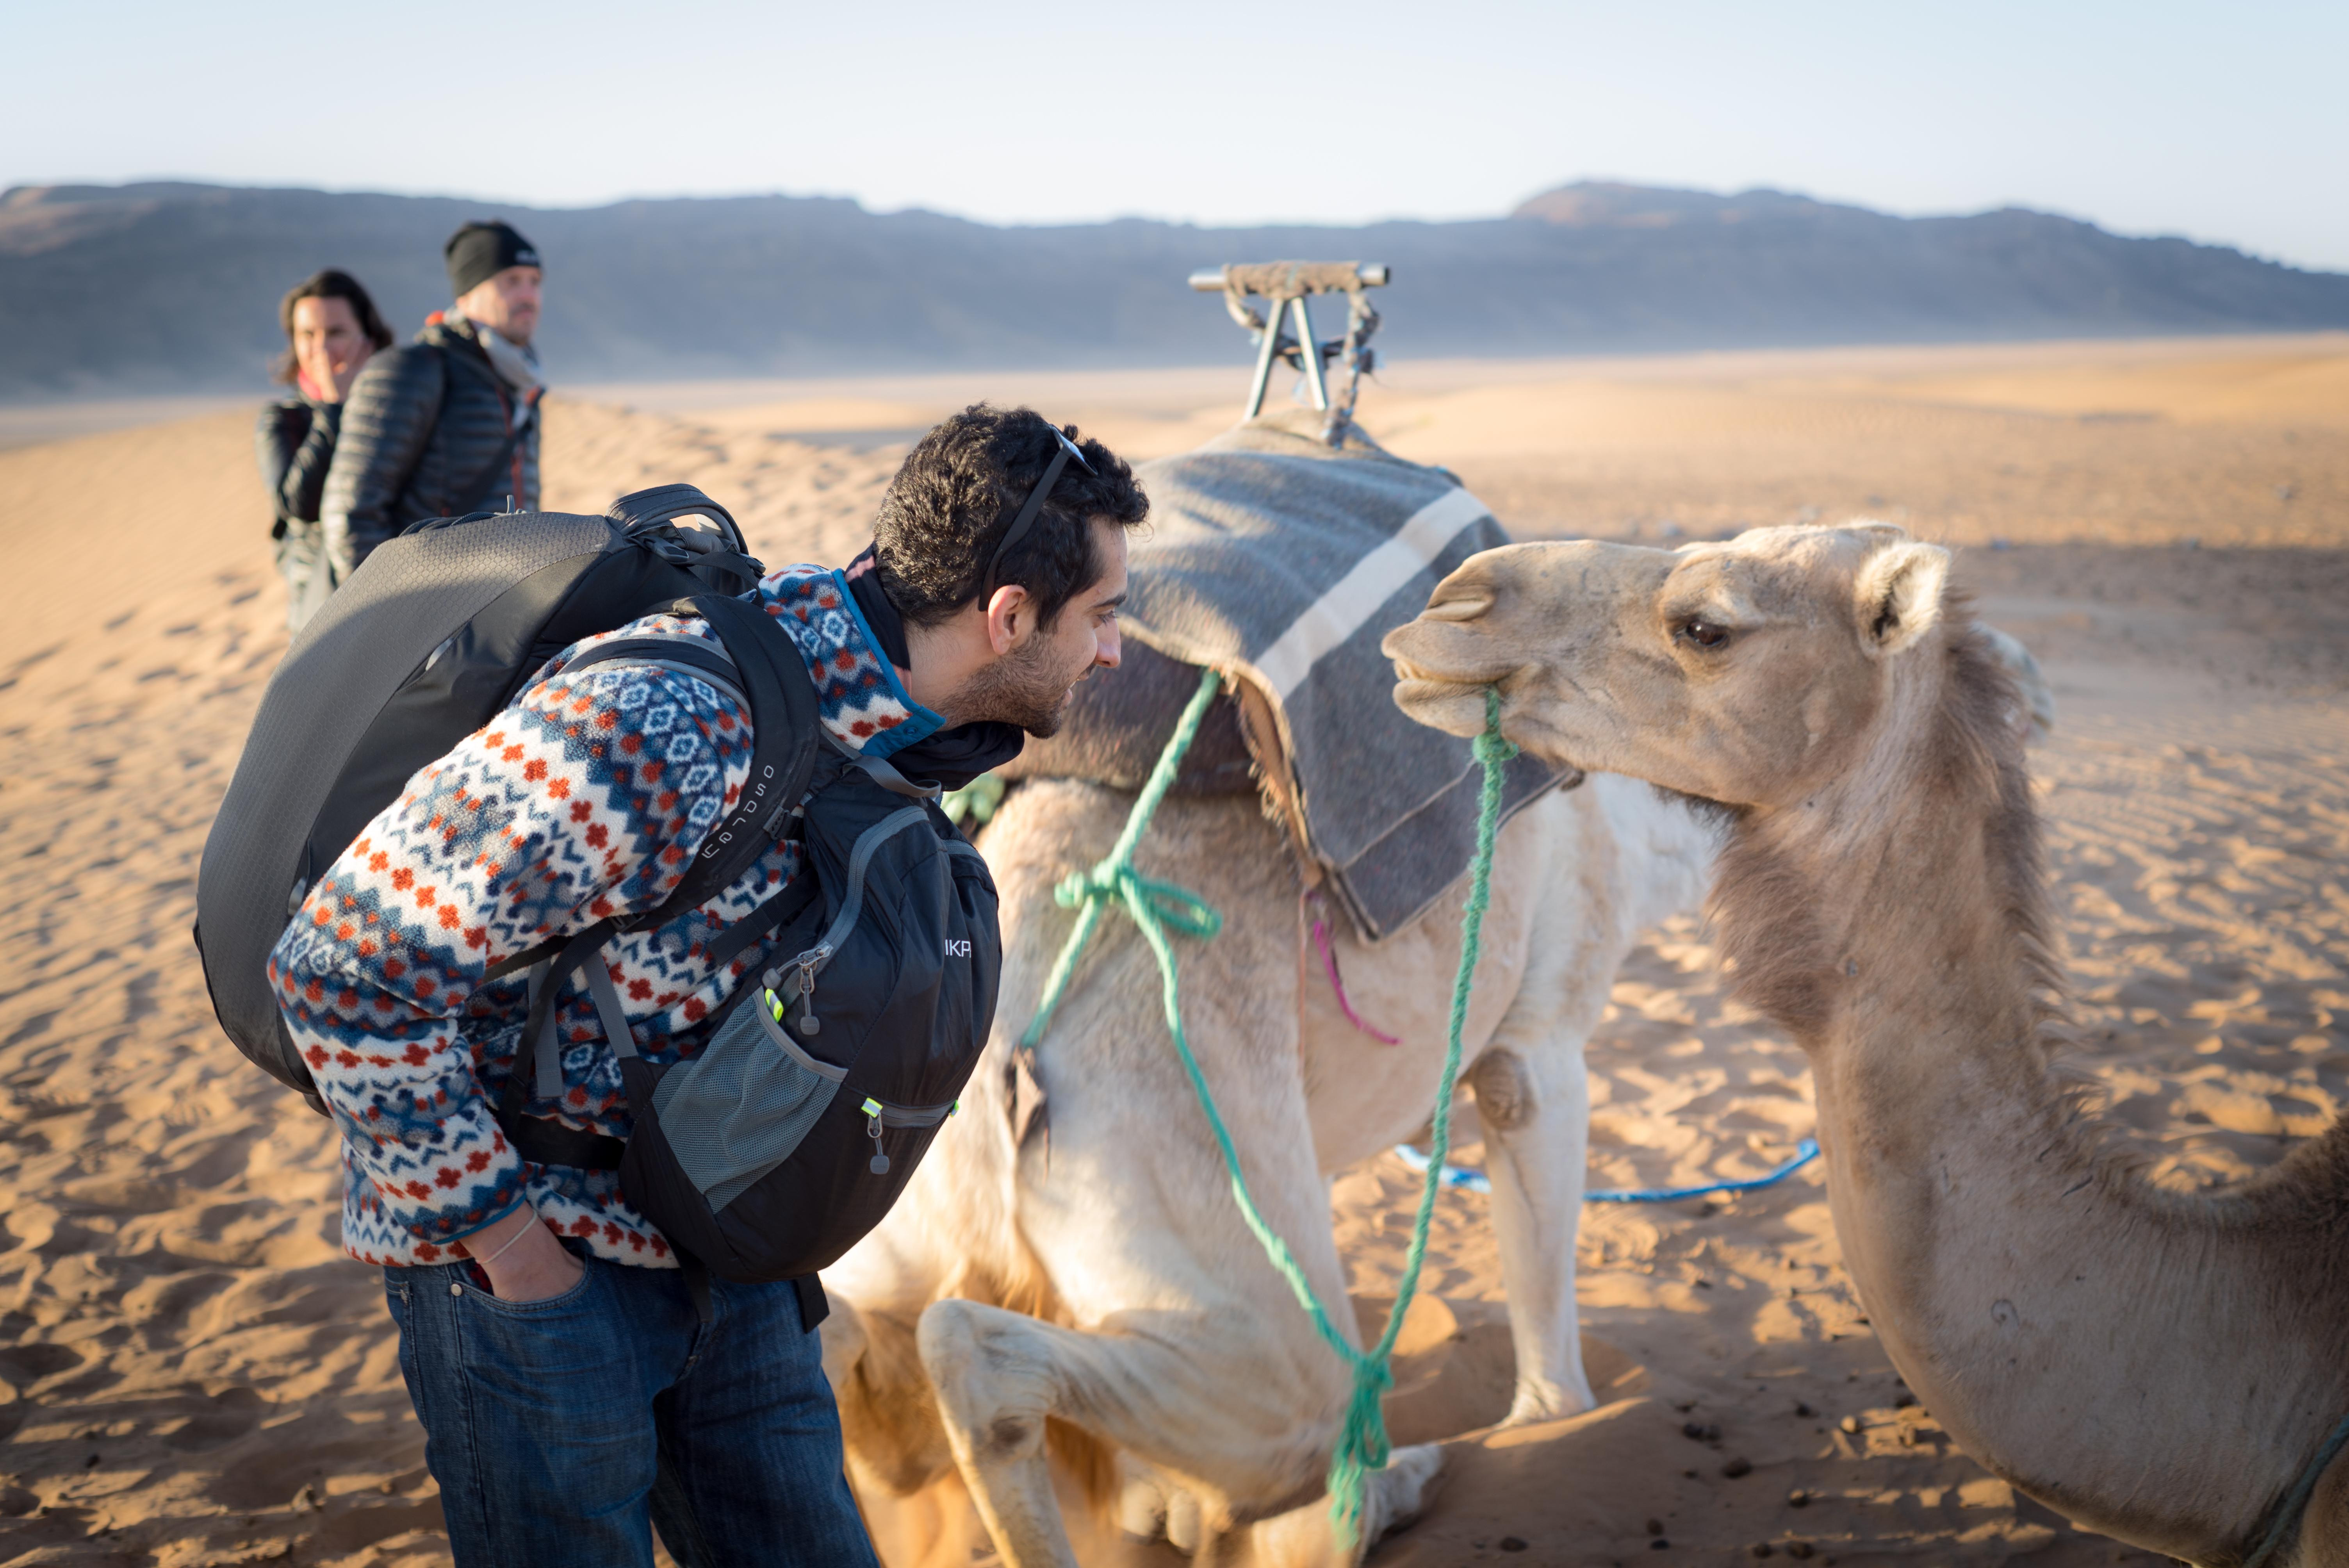 Student poses with a camel.